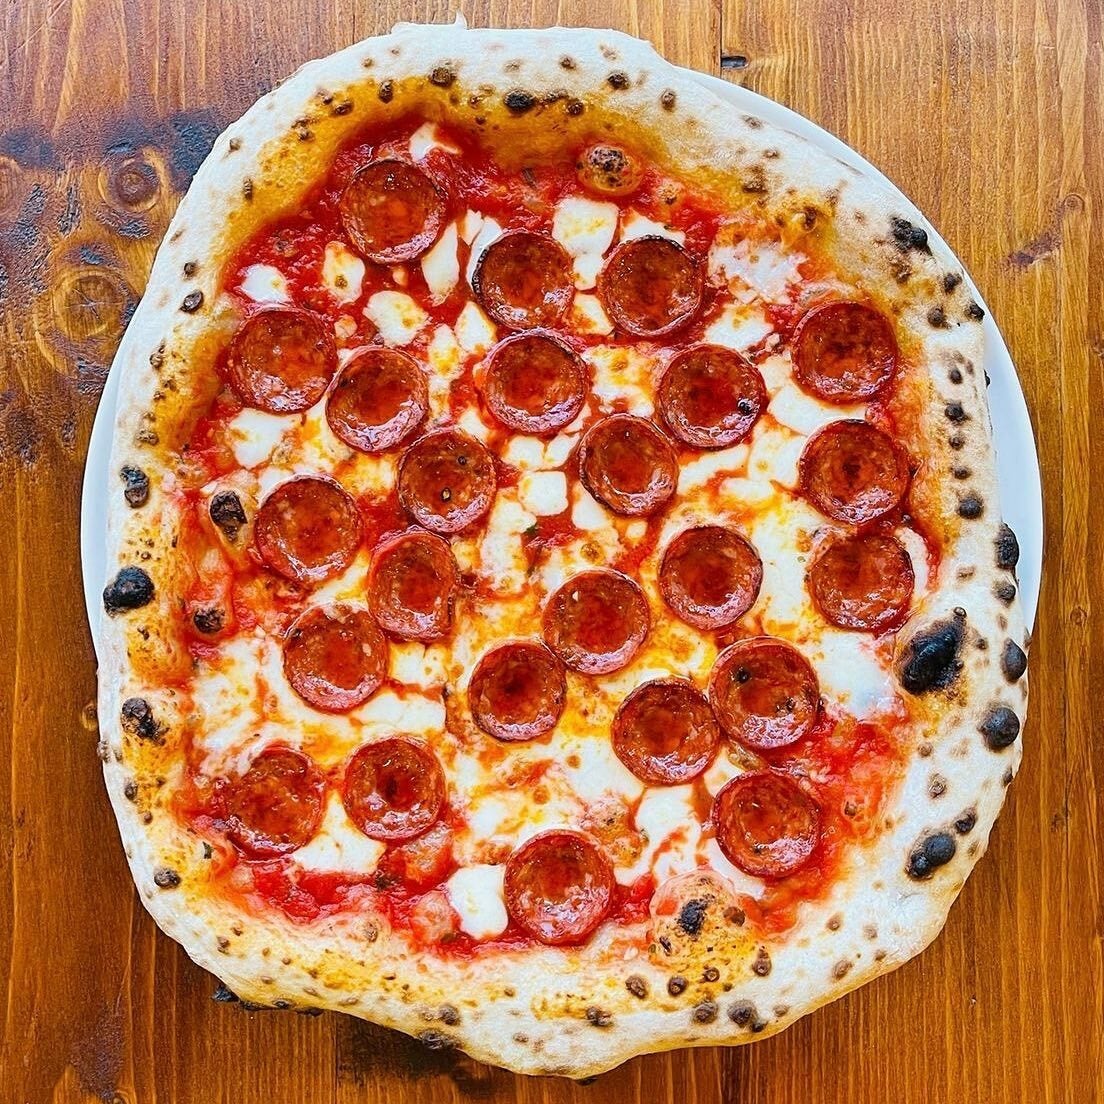 What is pepperoni pizza made of?